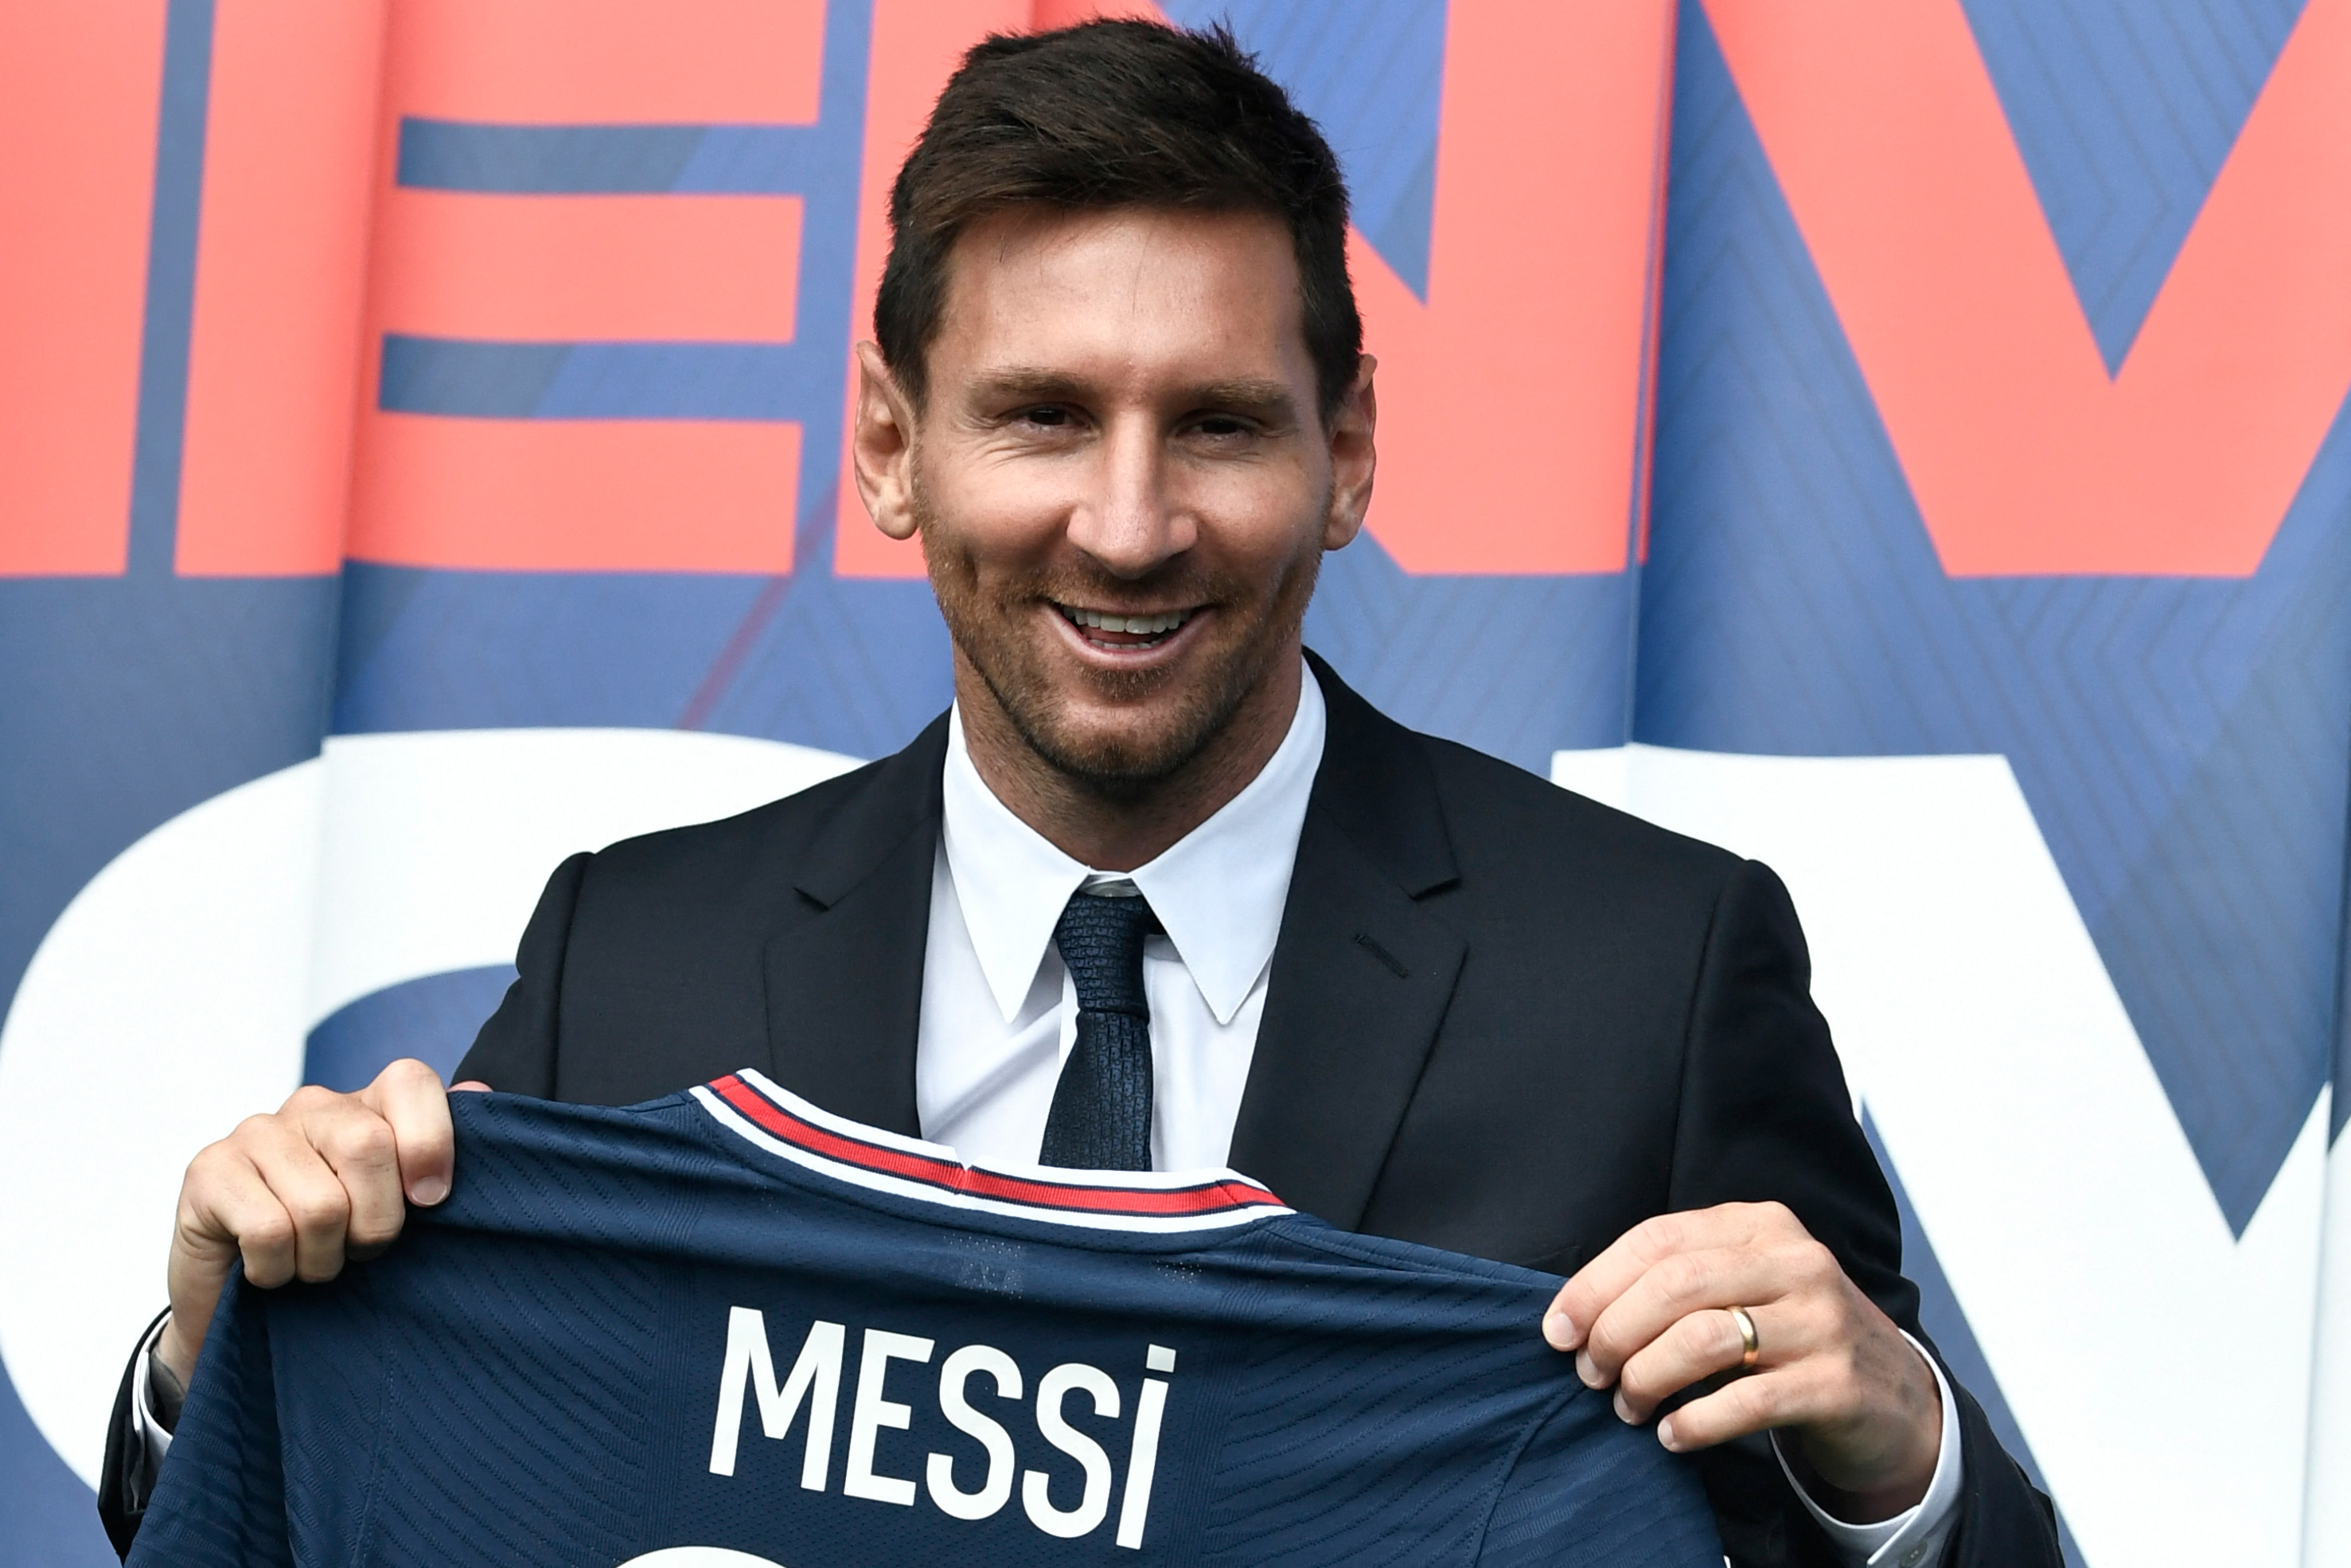 Messi PSG Move Gives Amazon Prime Video Ligue 1 Deal a Boost